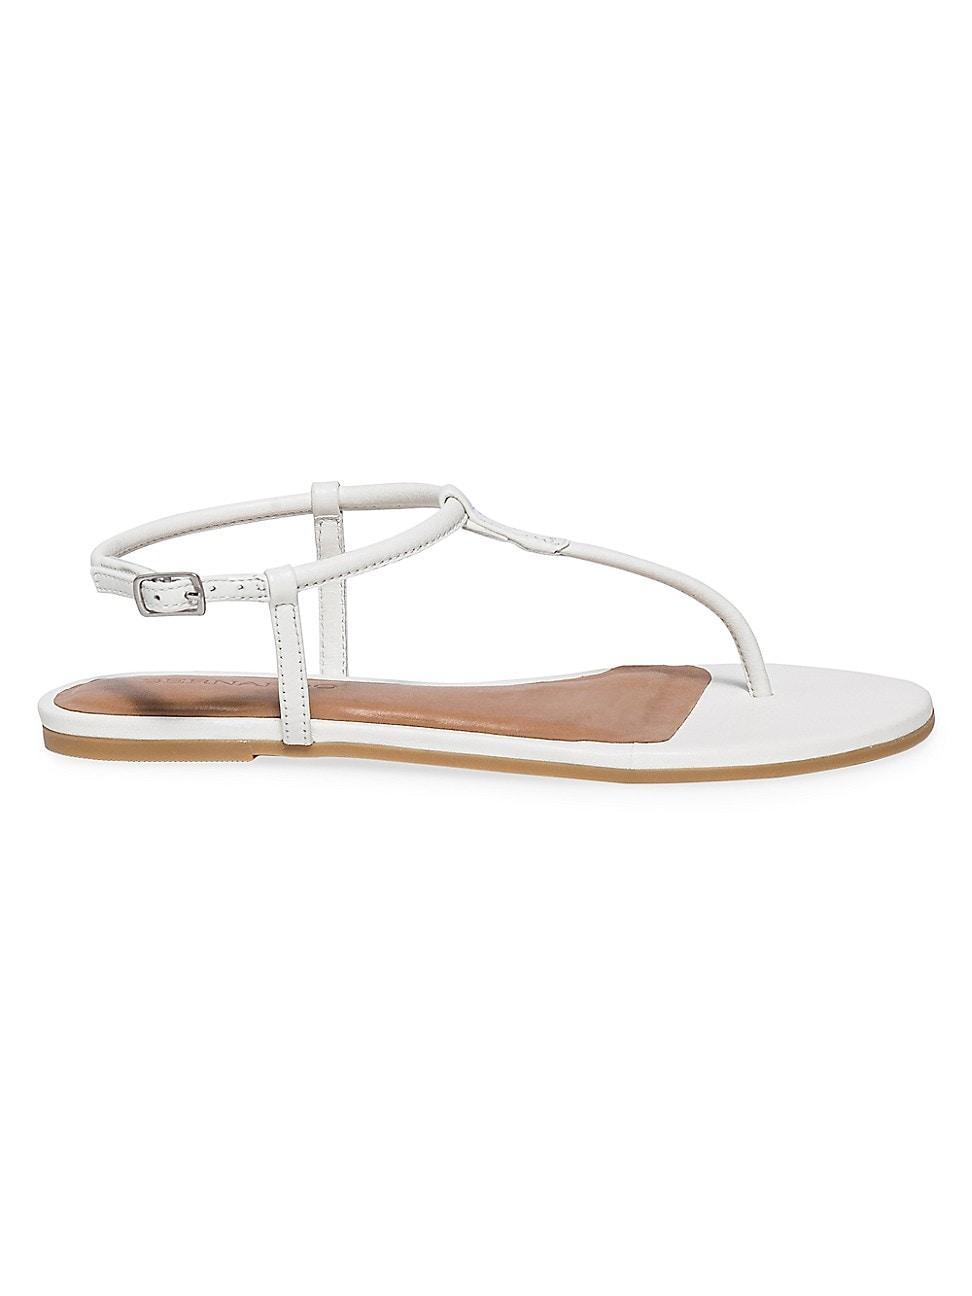 Womens Haven Leather Thong Sandals Product Image